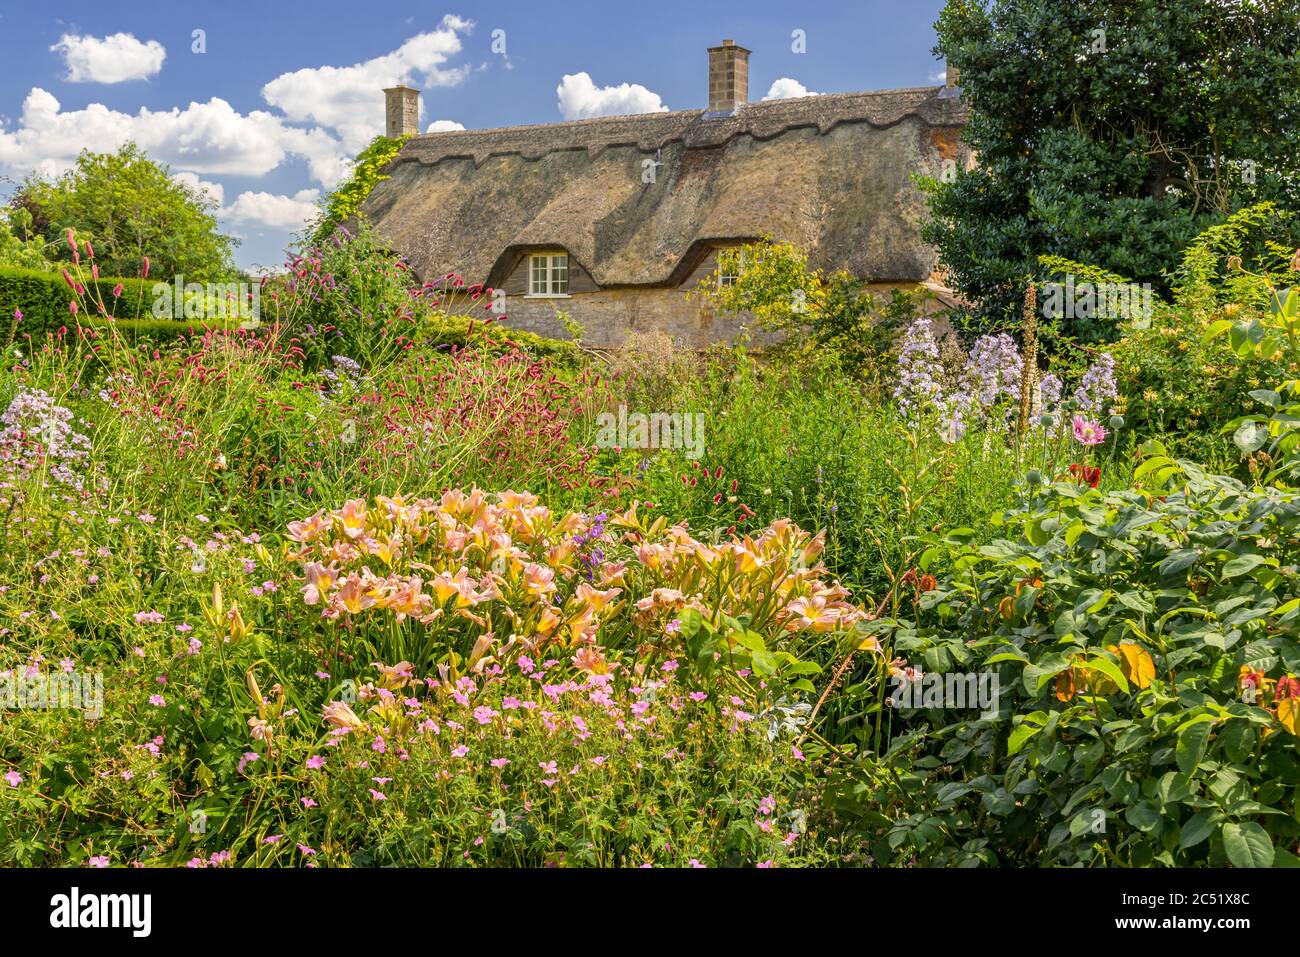 Typical cottage garden in front of a typical country cottage Stock Photo